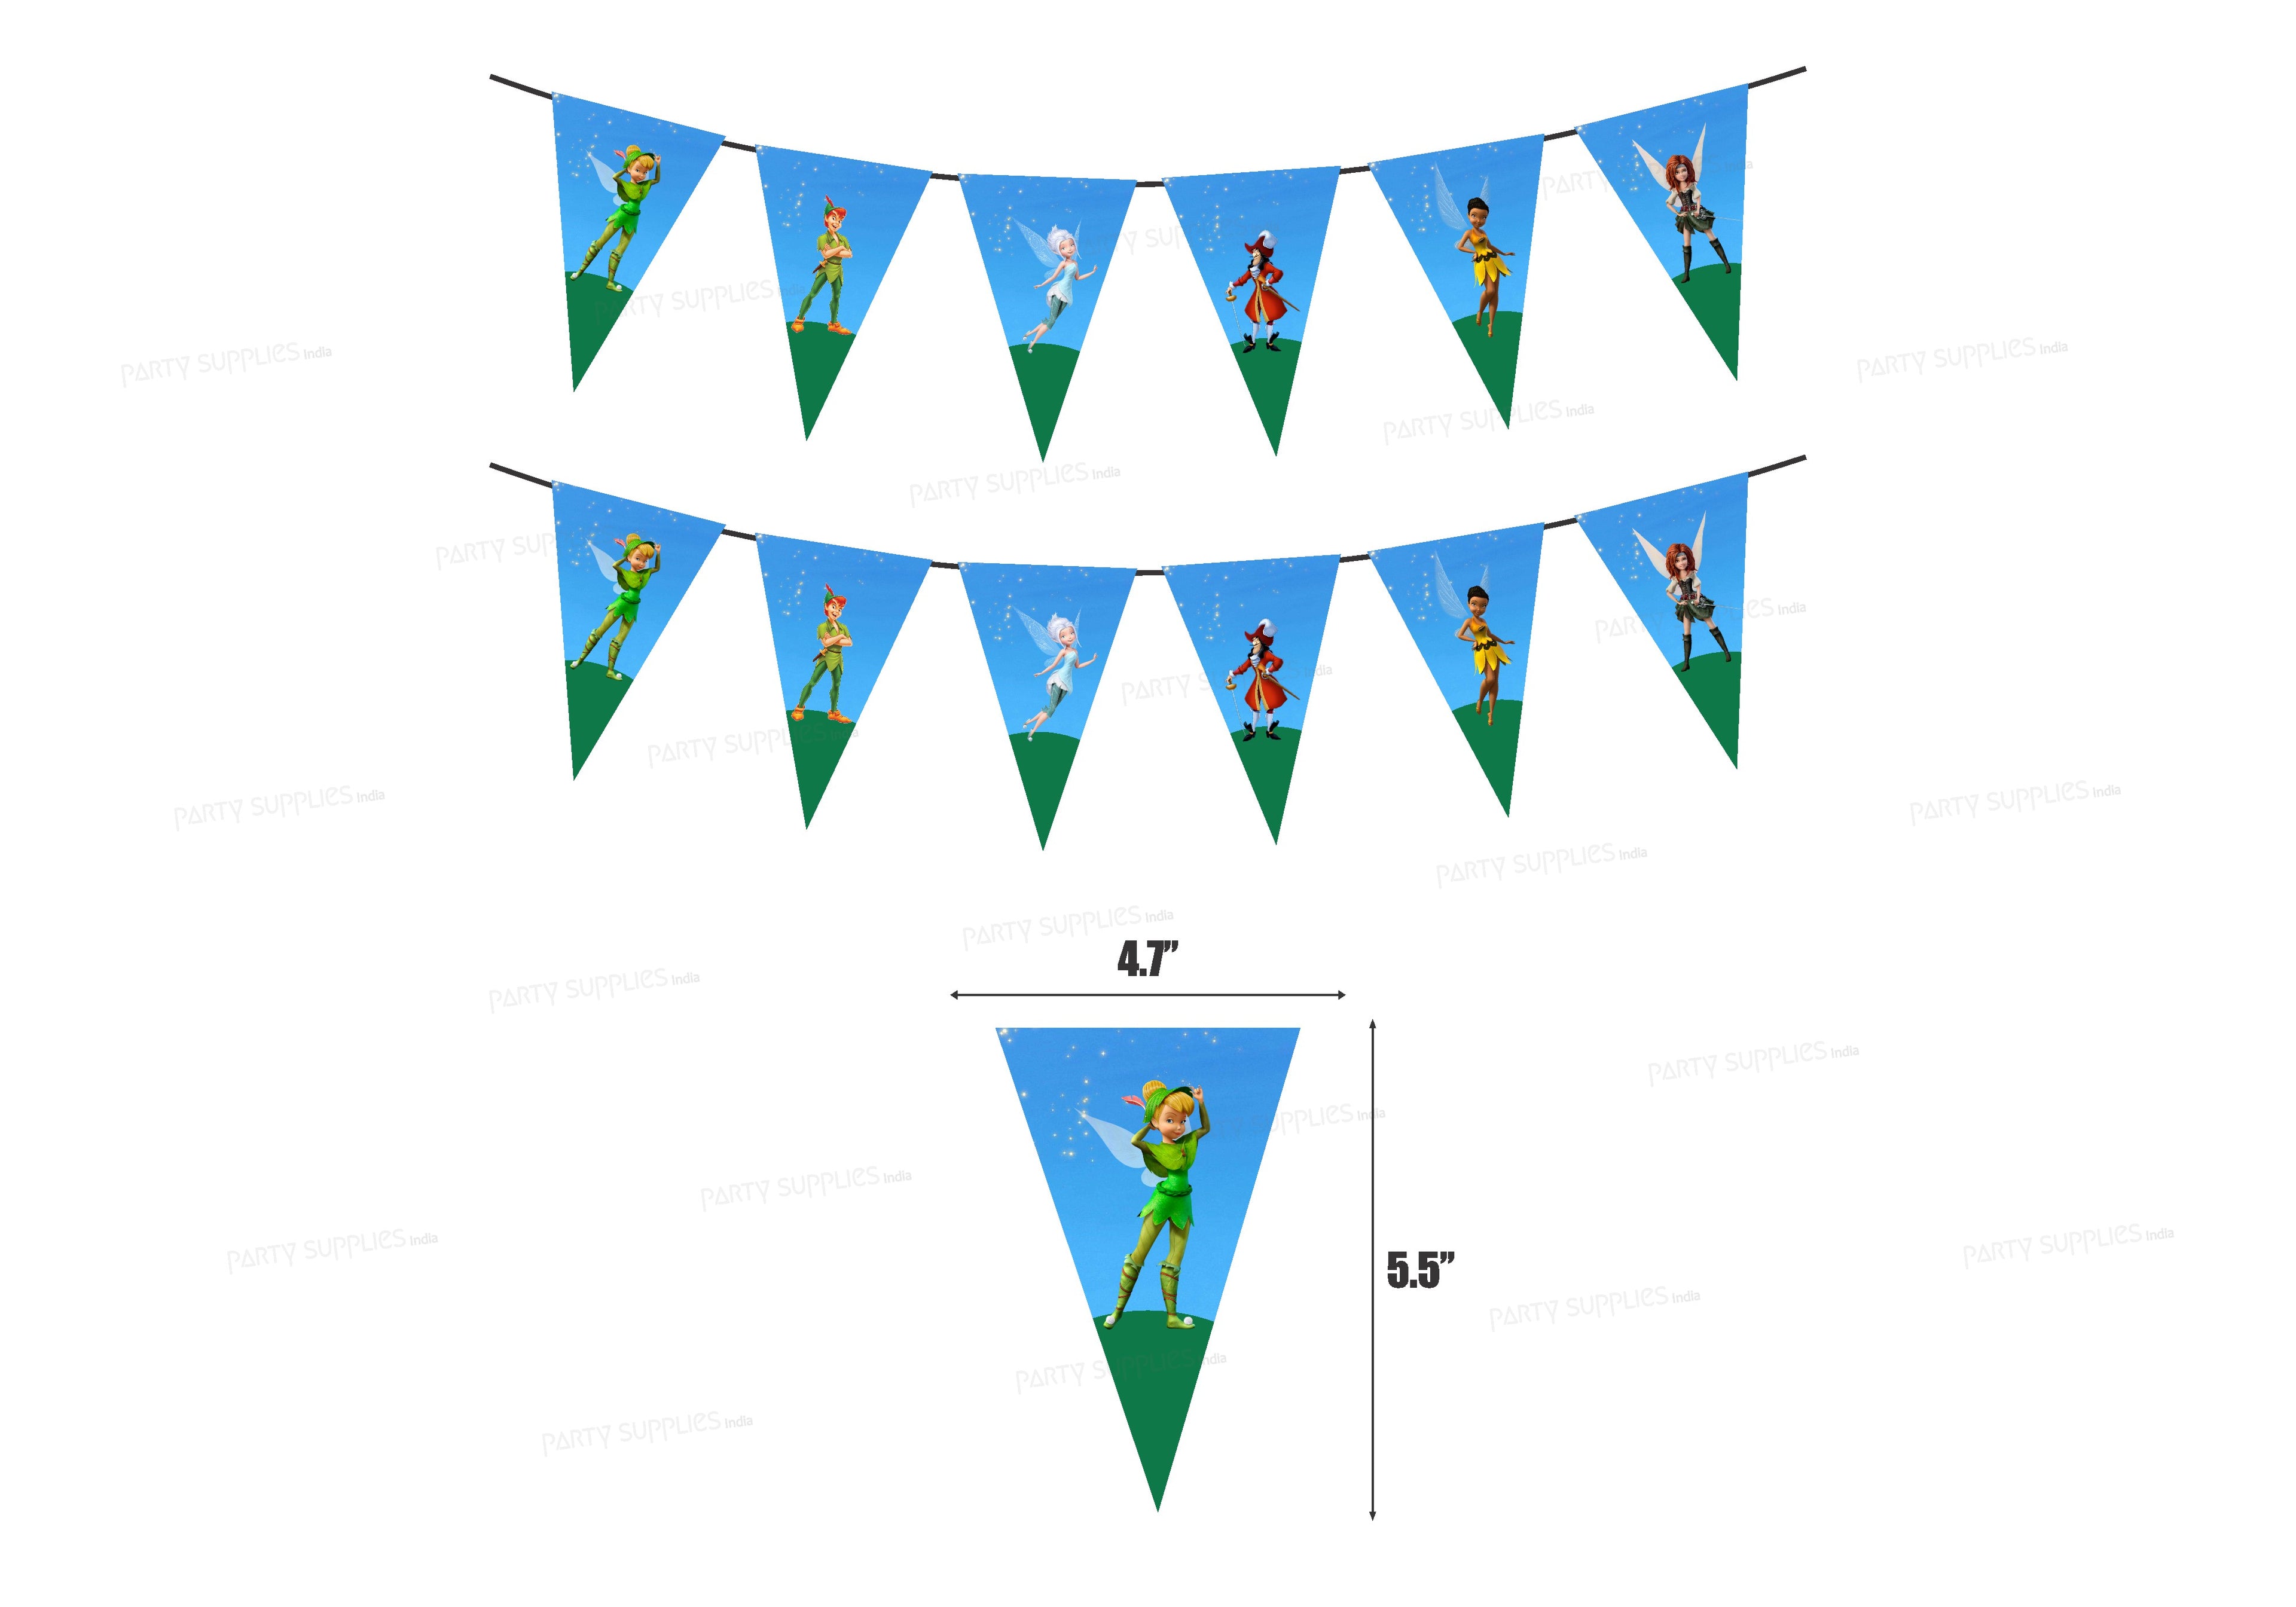 PSI Tinker Bell Theme Flag Bunting